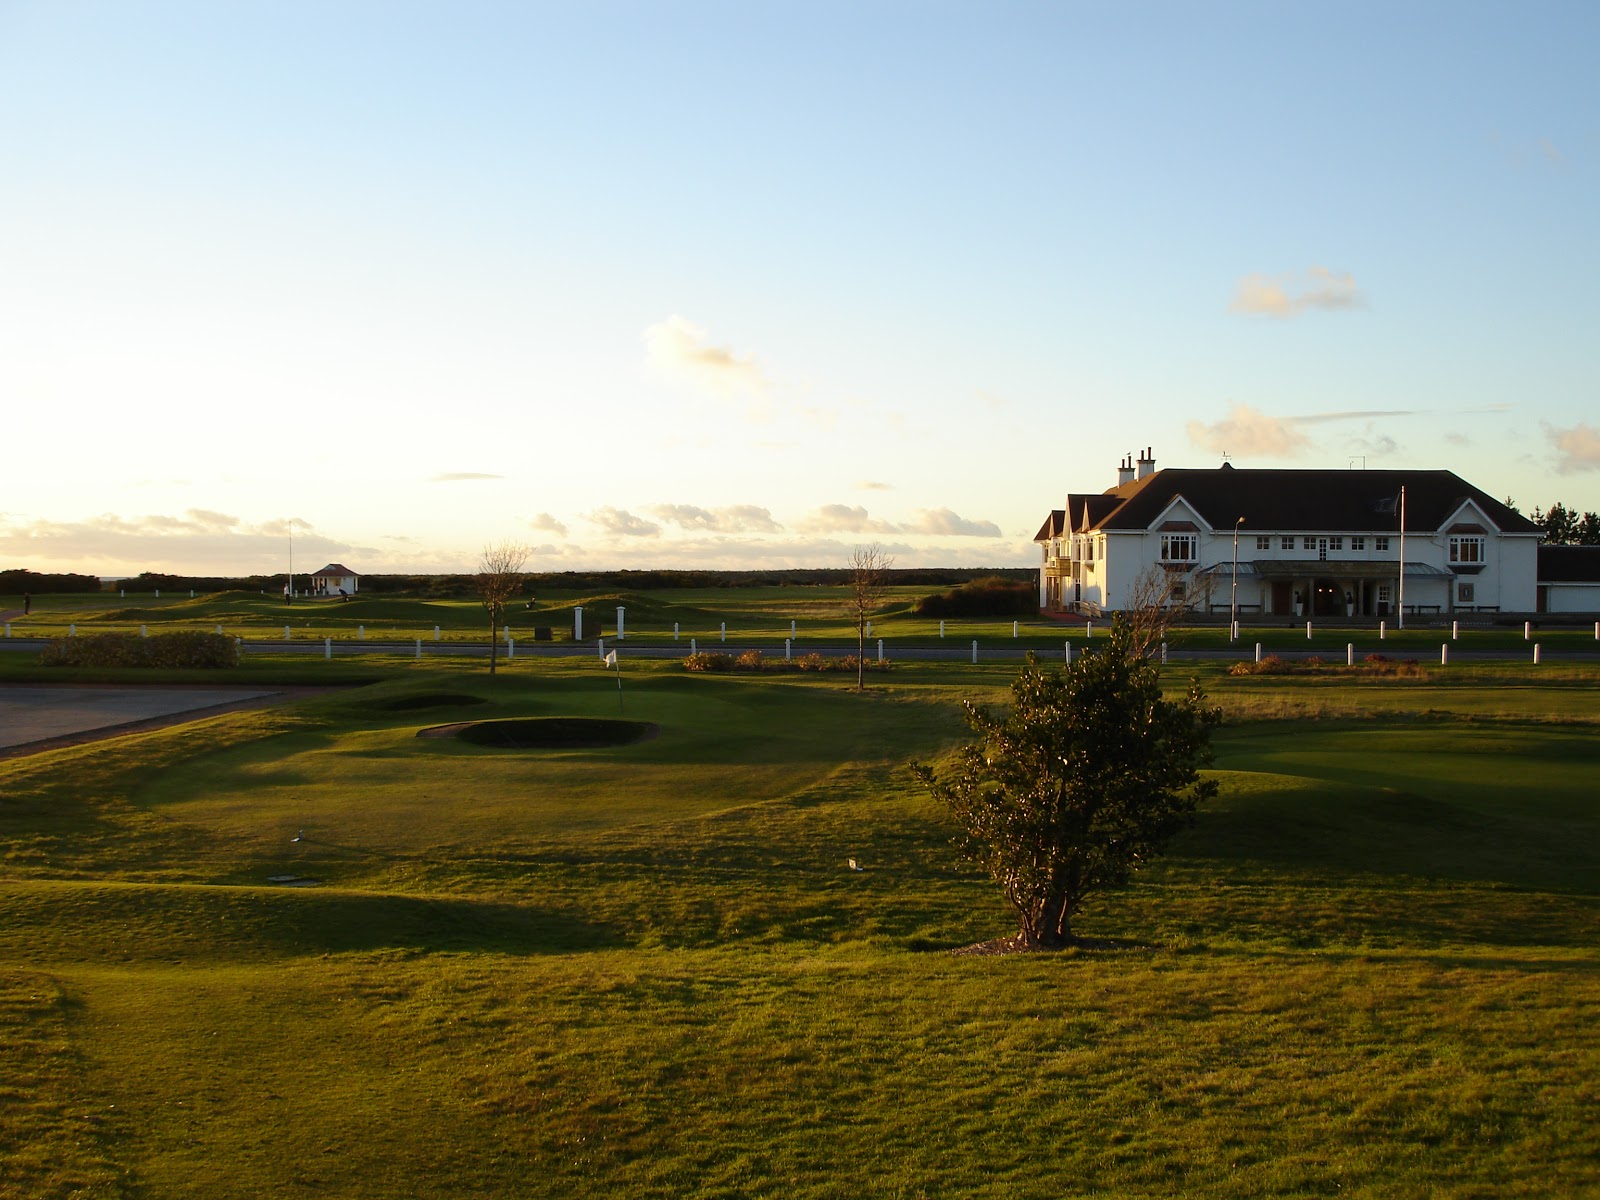 My Bunker Shot – Carnoustie 99 Cap - Lay Day